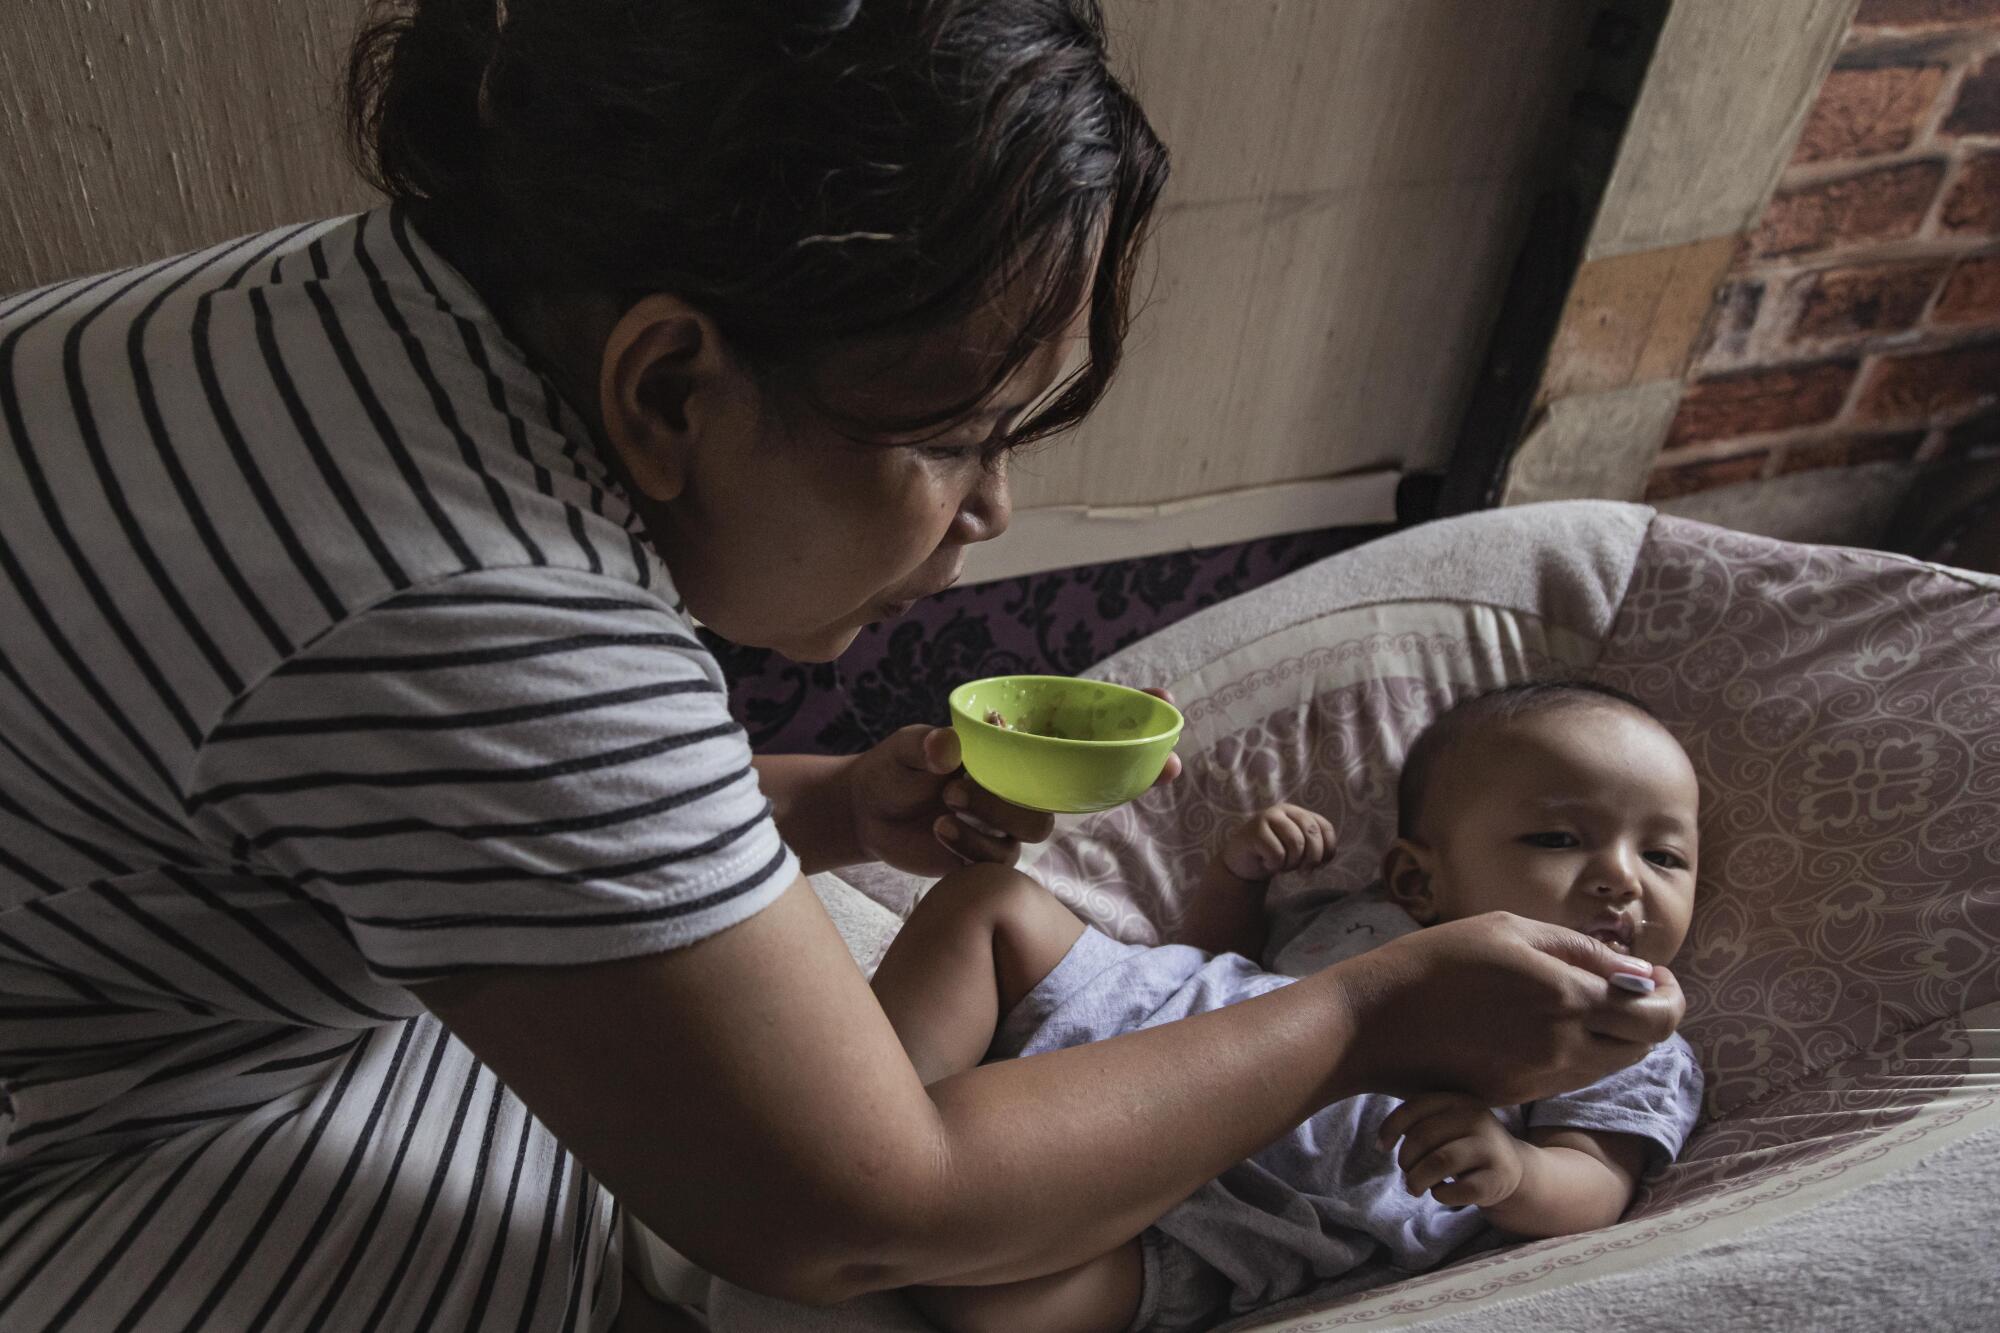 A woman holding a green bowl feeds an infant 